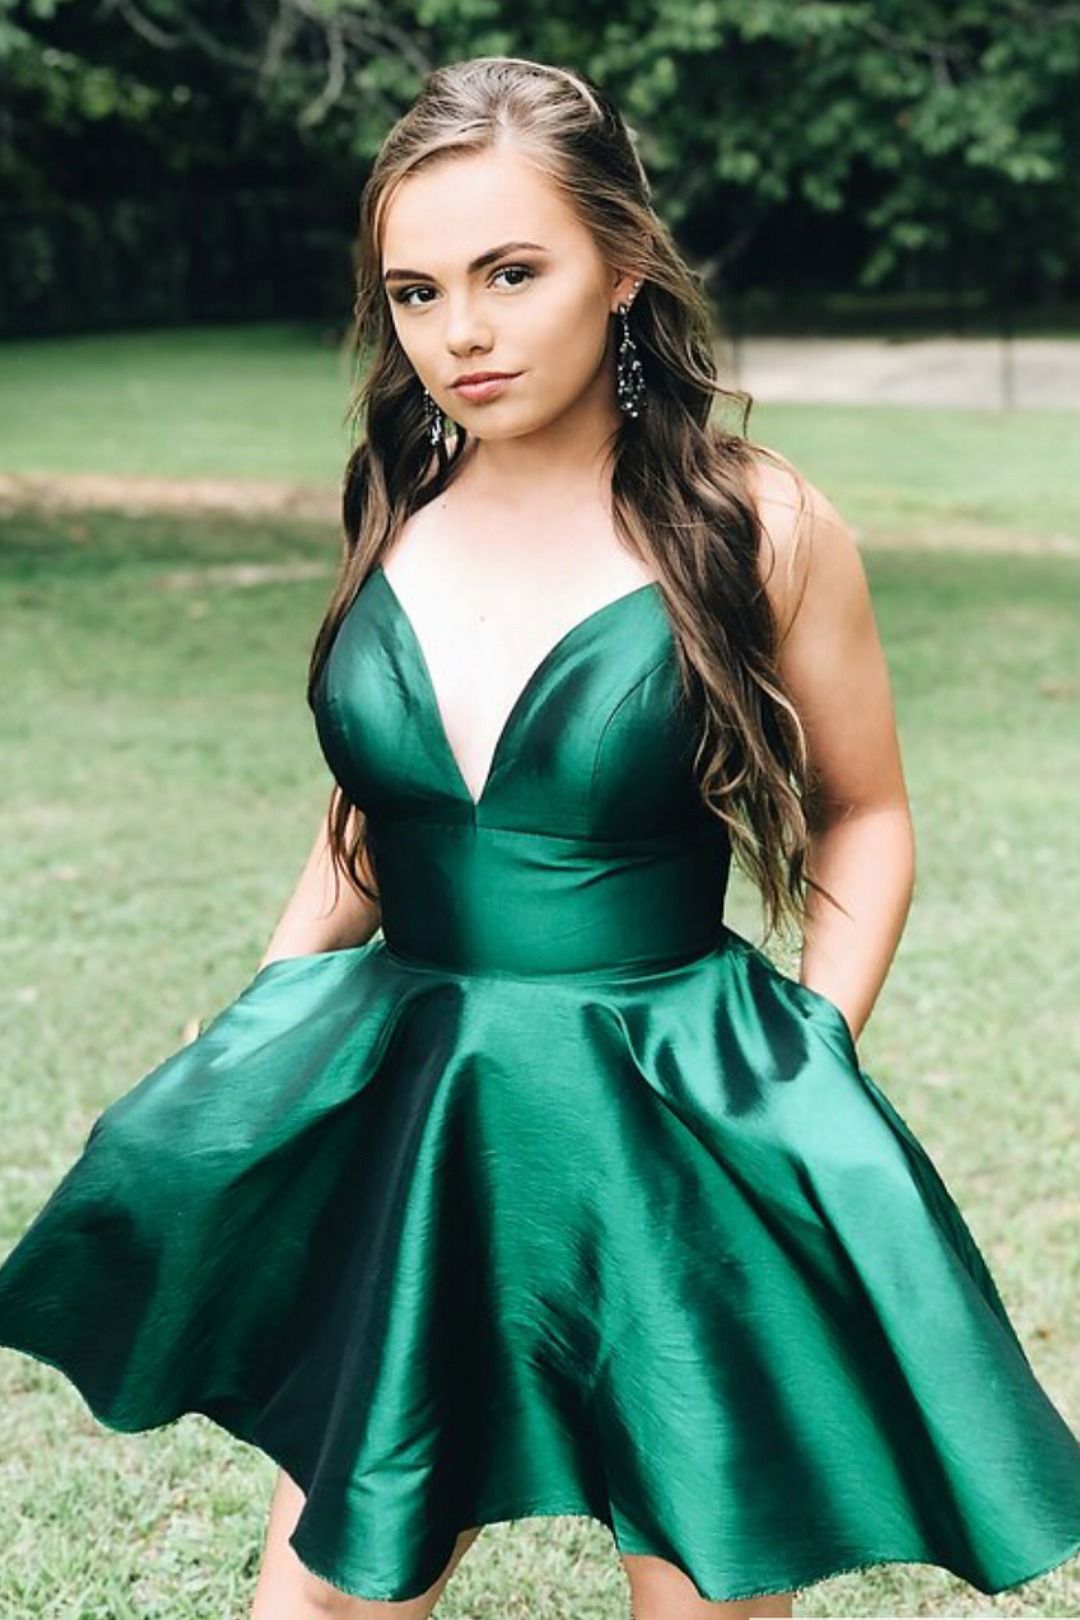 Short Dark Green Prom Dress Homecoming Dress,Simple Prom Dress with Spaghetti Straps,DS0964